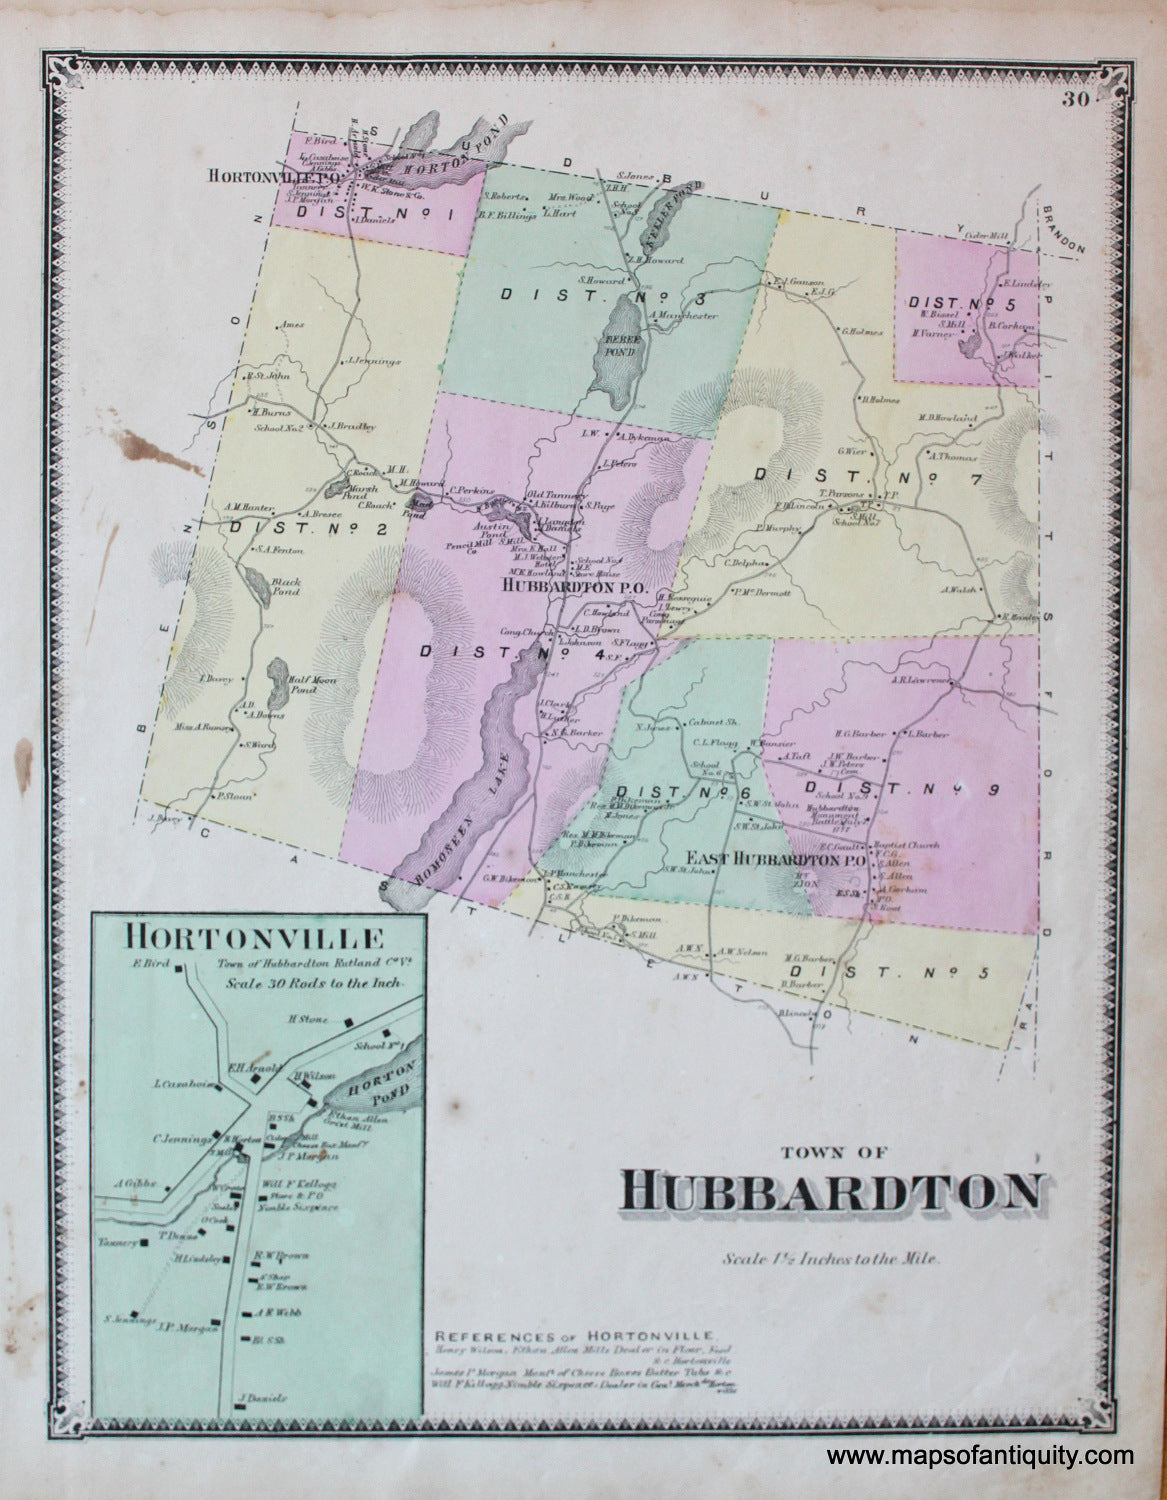 Antique-Hand-Colored-Map-Hubbarton-VT---Vermont-United-States-Northeast-1869-Beers-Maps-Of-Antiquity